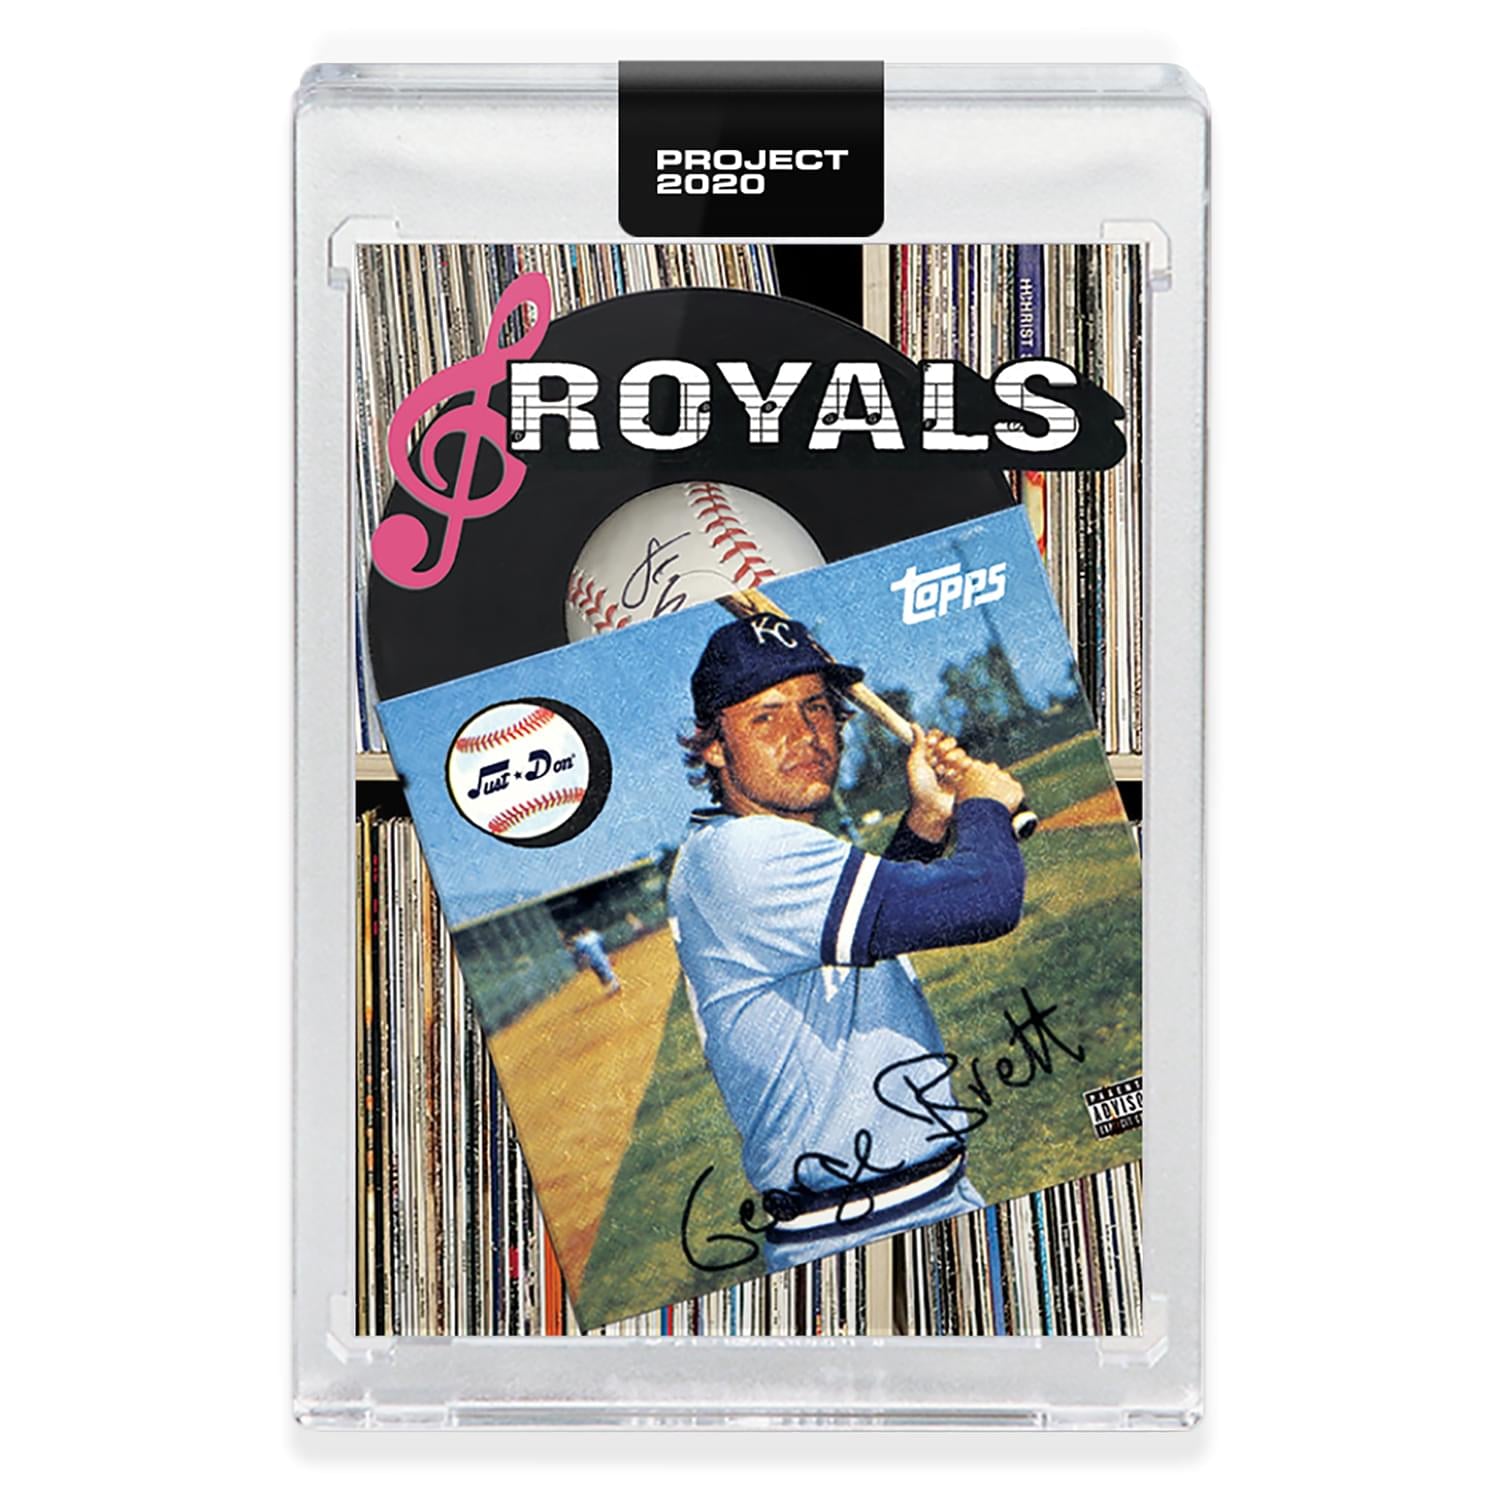 Topps PROJECT 2020 Card 212 - 1975 George Brett by Don C